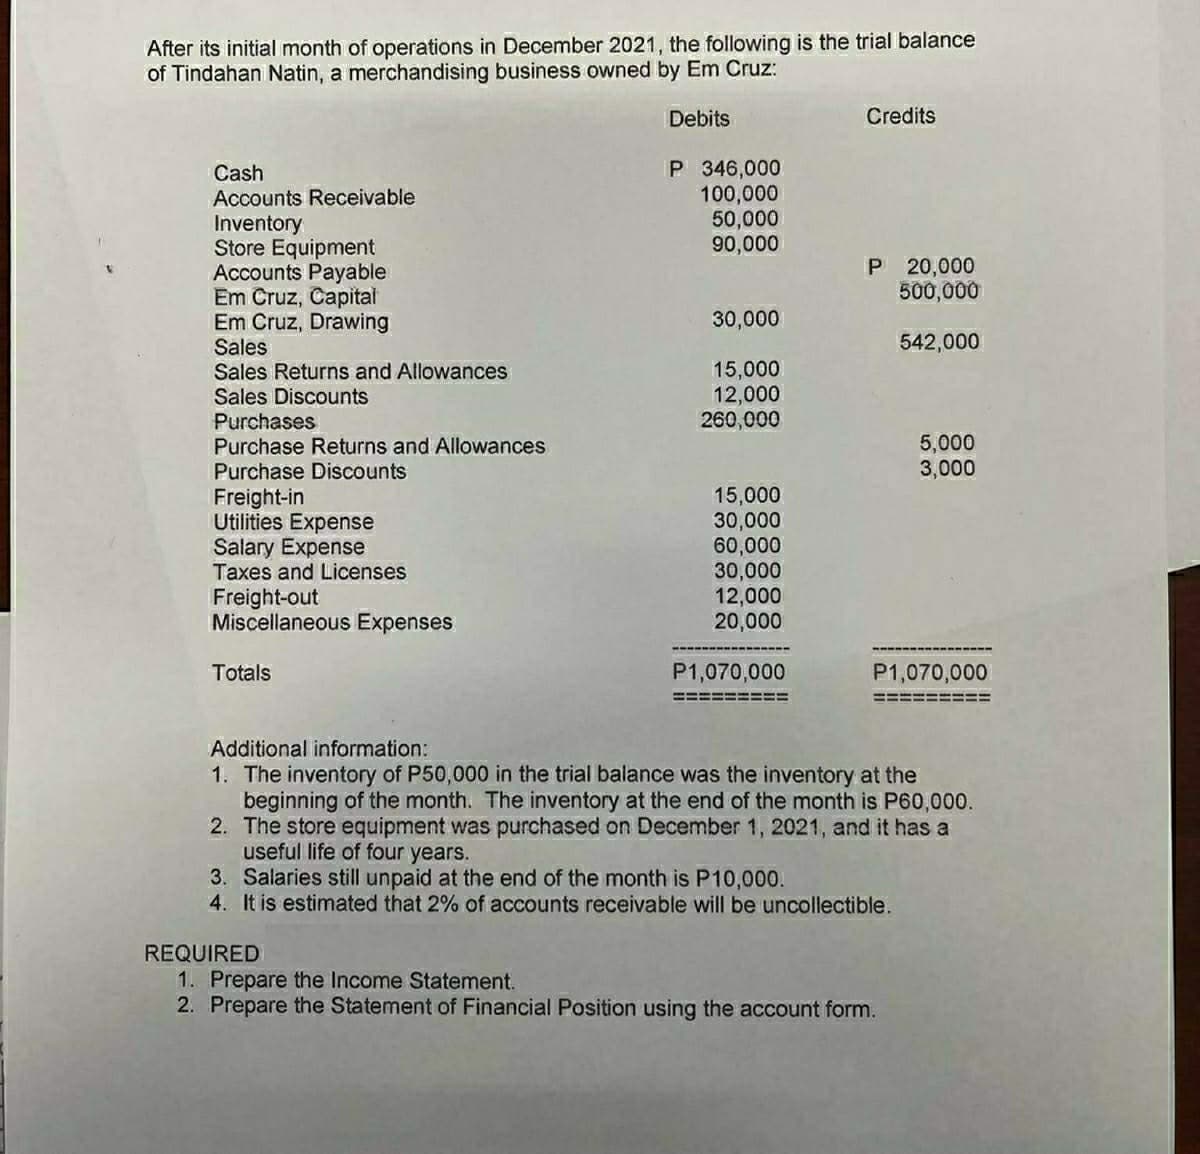 After its initial month of operations in December 2021, the following is the trial balance
of Tindahan Natin, a merchandising business owned by Em Cruz:
Debits
Credits
P 346,000
100,000
50,000
90,000
Cash
Accounts Receivable
Inventory
Store Equipment
Accounts Payable
Em Cruz, Capital
Em Cruz, Drawing
Sales
Sales Returns and Allowances
Sales Discounts
Purchases
Purchase Returns and Allowances
Purchase Discounts
P 20,000
500,000
30,000
542,000
15,000
12,000
260,000
5,000
3,000
Freight-in
Utilities Expense
Salary Expense
Taxes and Licenses
15,000
30,000
60,000
30,000
12,000
20,000
Freight-out
Miscellaneous Expenses
Totals
P1,070,000
P1,070,000
Additional information:
1. The inventory of P50,000 in the trial balance was the inventory at the
beginning of the month. The inventory at the end of the month is P60,000.
2. The store equipment was purchased on December 1, 2021, and it has a
useful life of four years.
3. Salaries still unpaid at the end of the month is P10,000.
4. It is estimated that 2% of accounts receivable will be uncollectible.
REQUIRED
1. Prepare the Income Statement.
2. Prepare the Statement of Financial Position using the account form.
